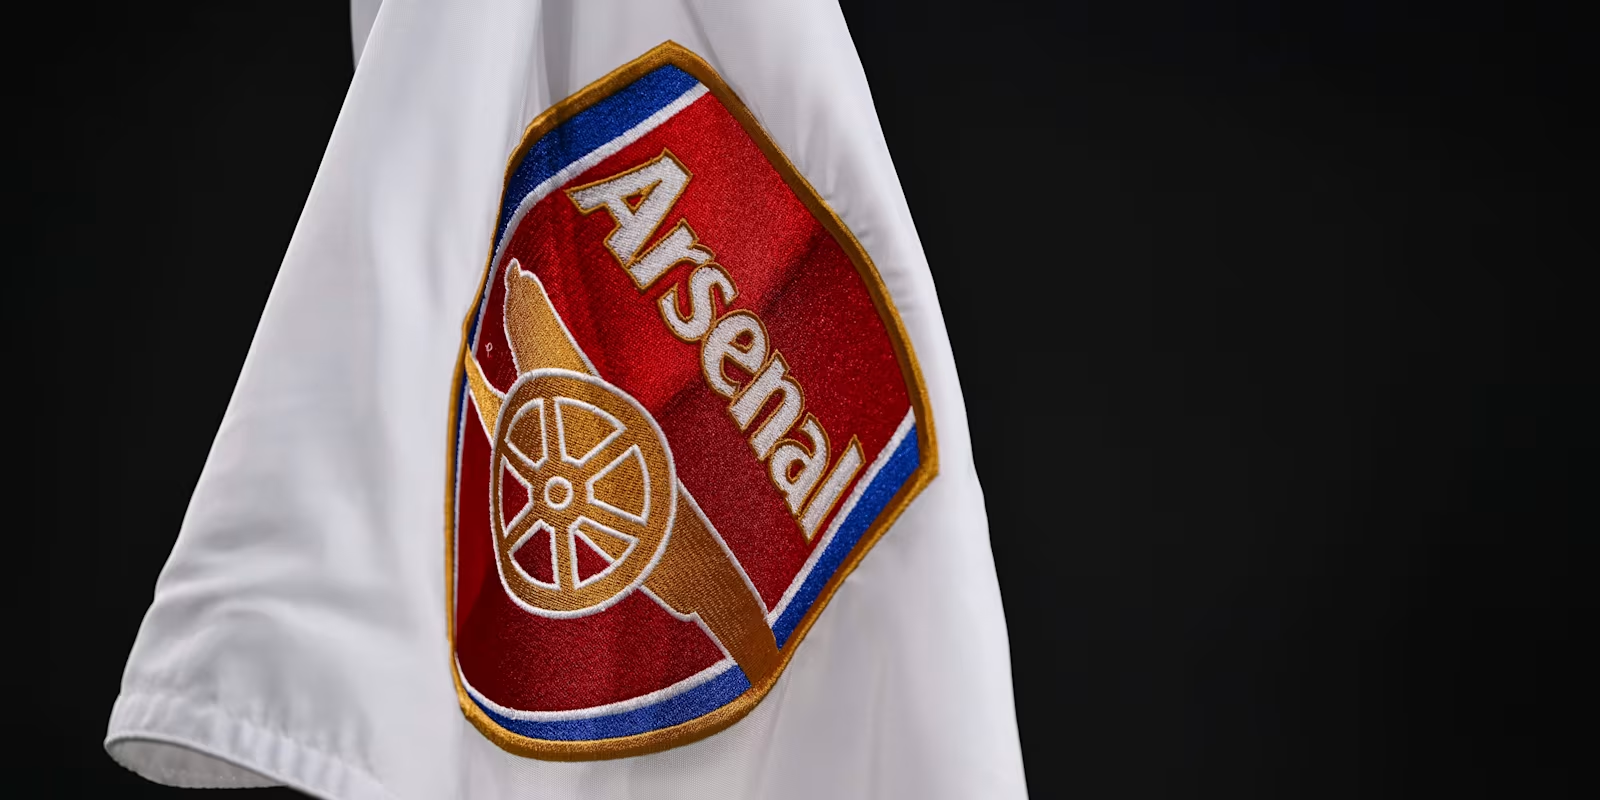 Arsenal set to announce new signing that will make Raya angry